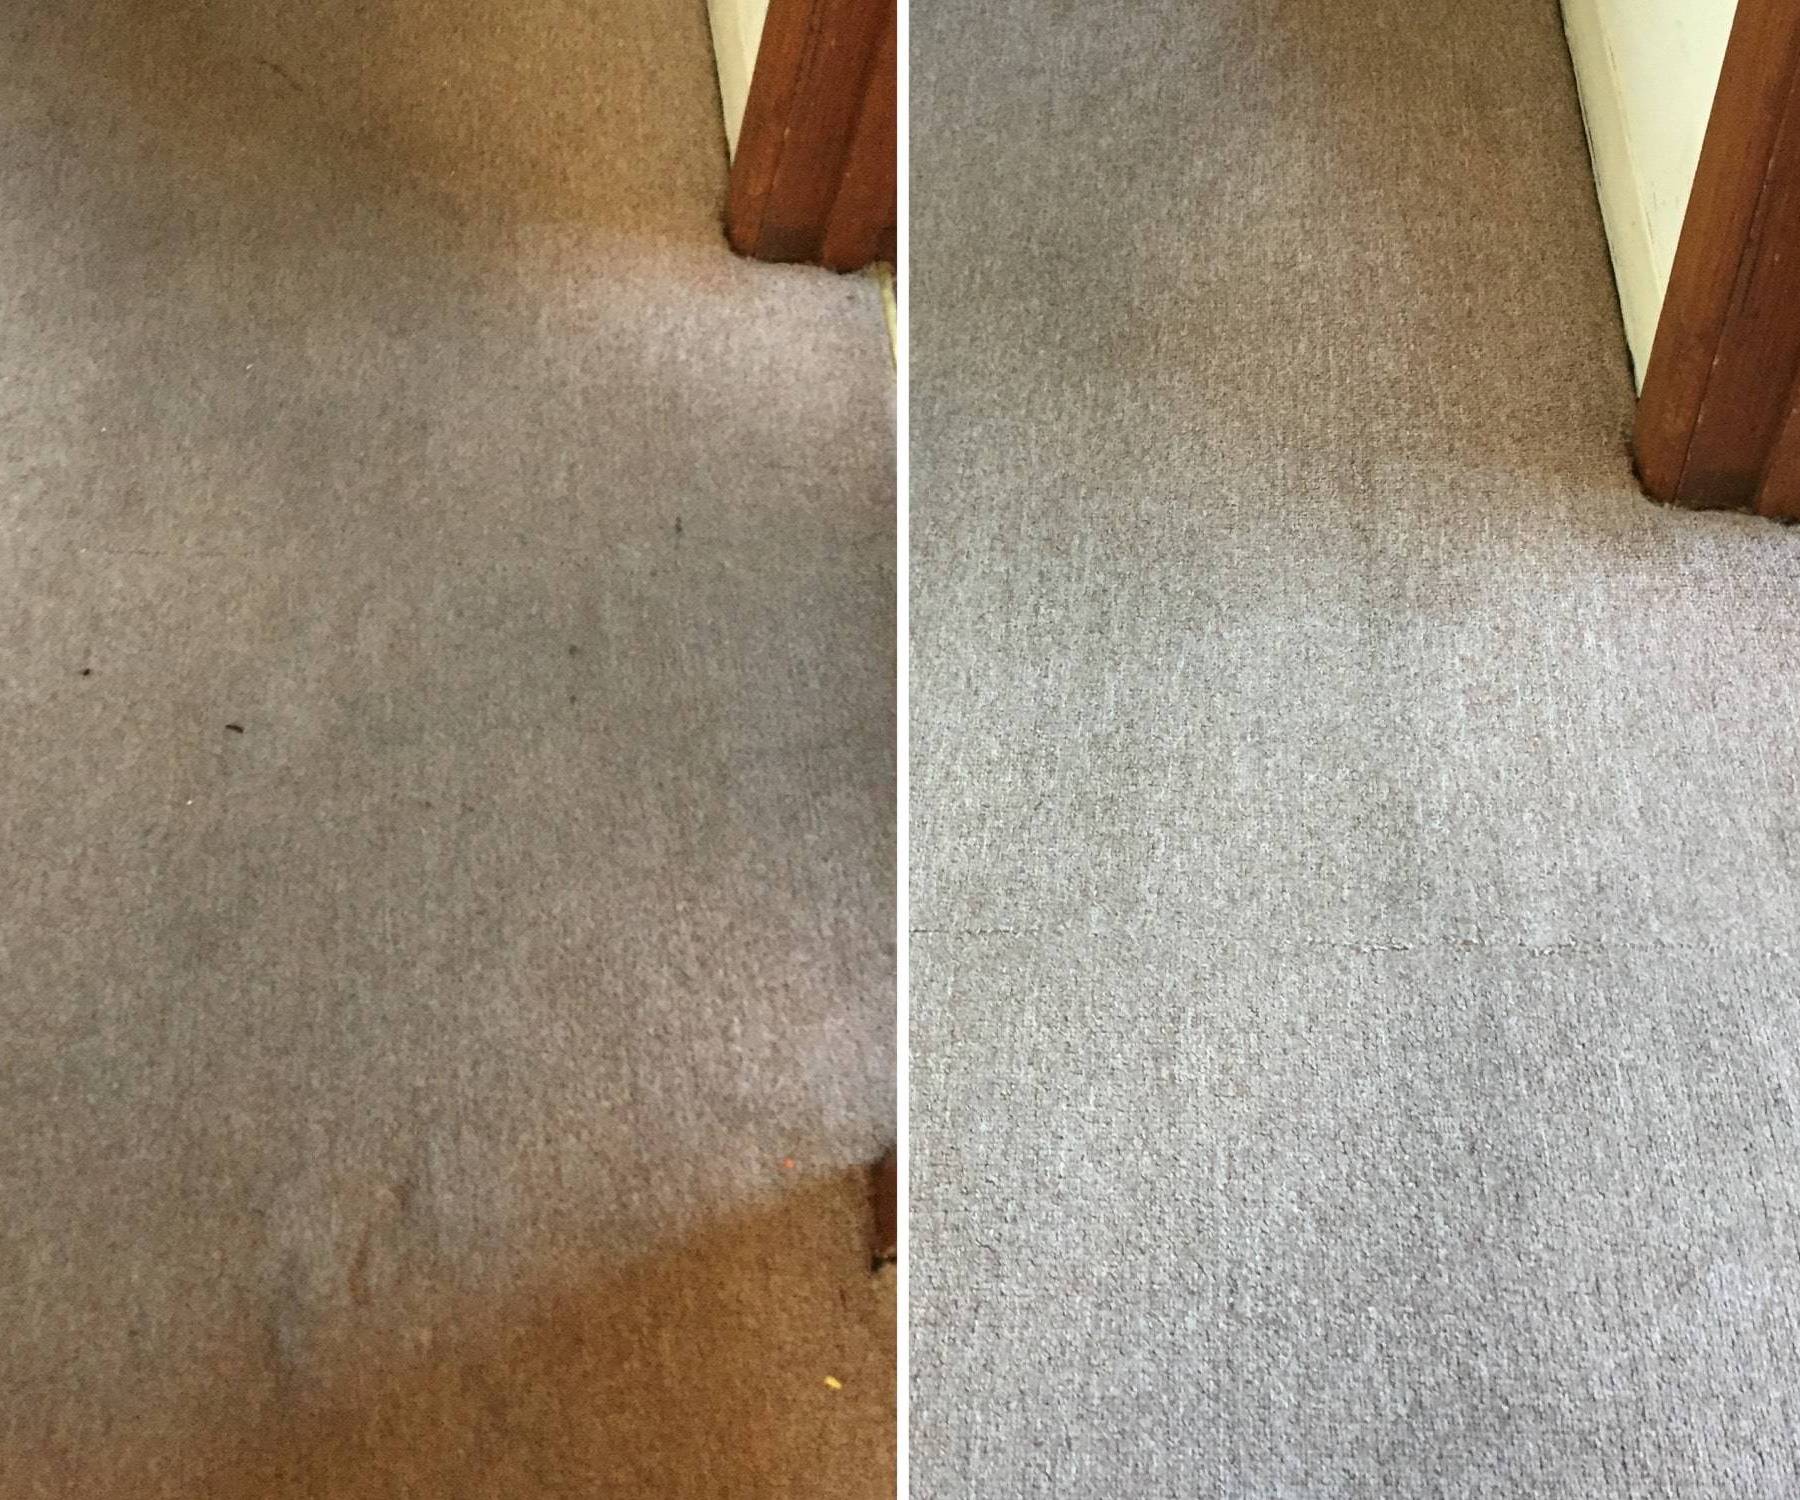 Carpet Cleaning Services In Melbourne